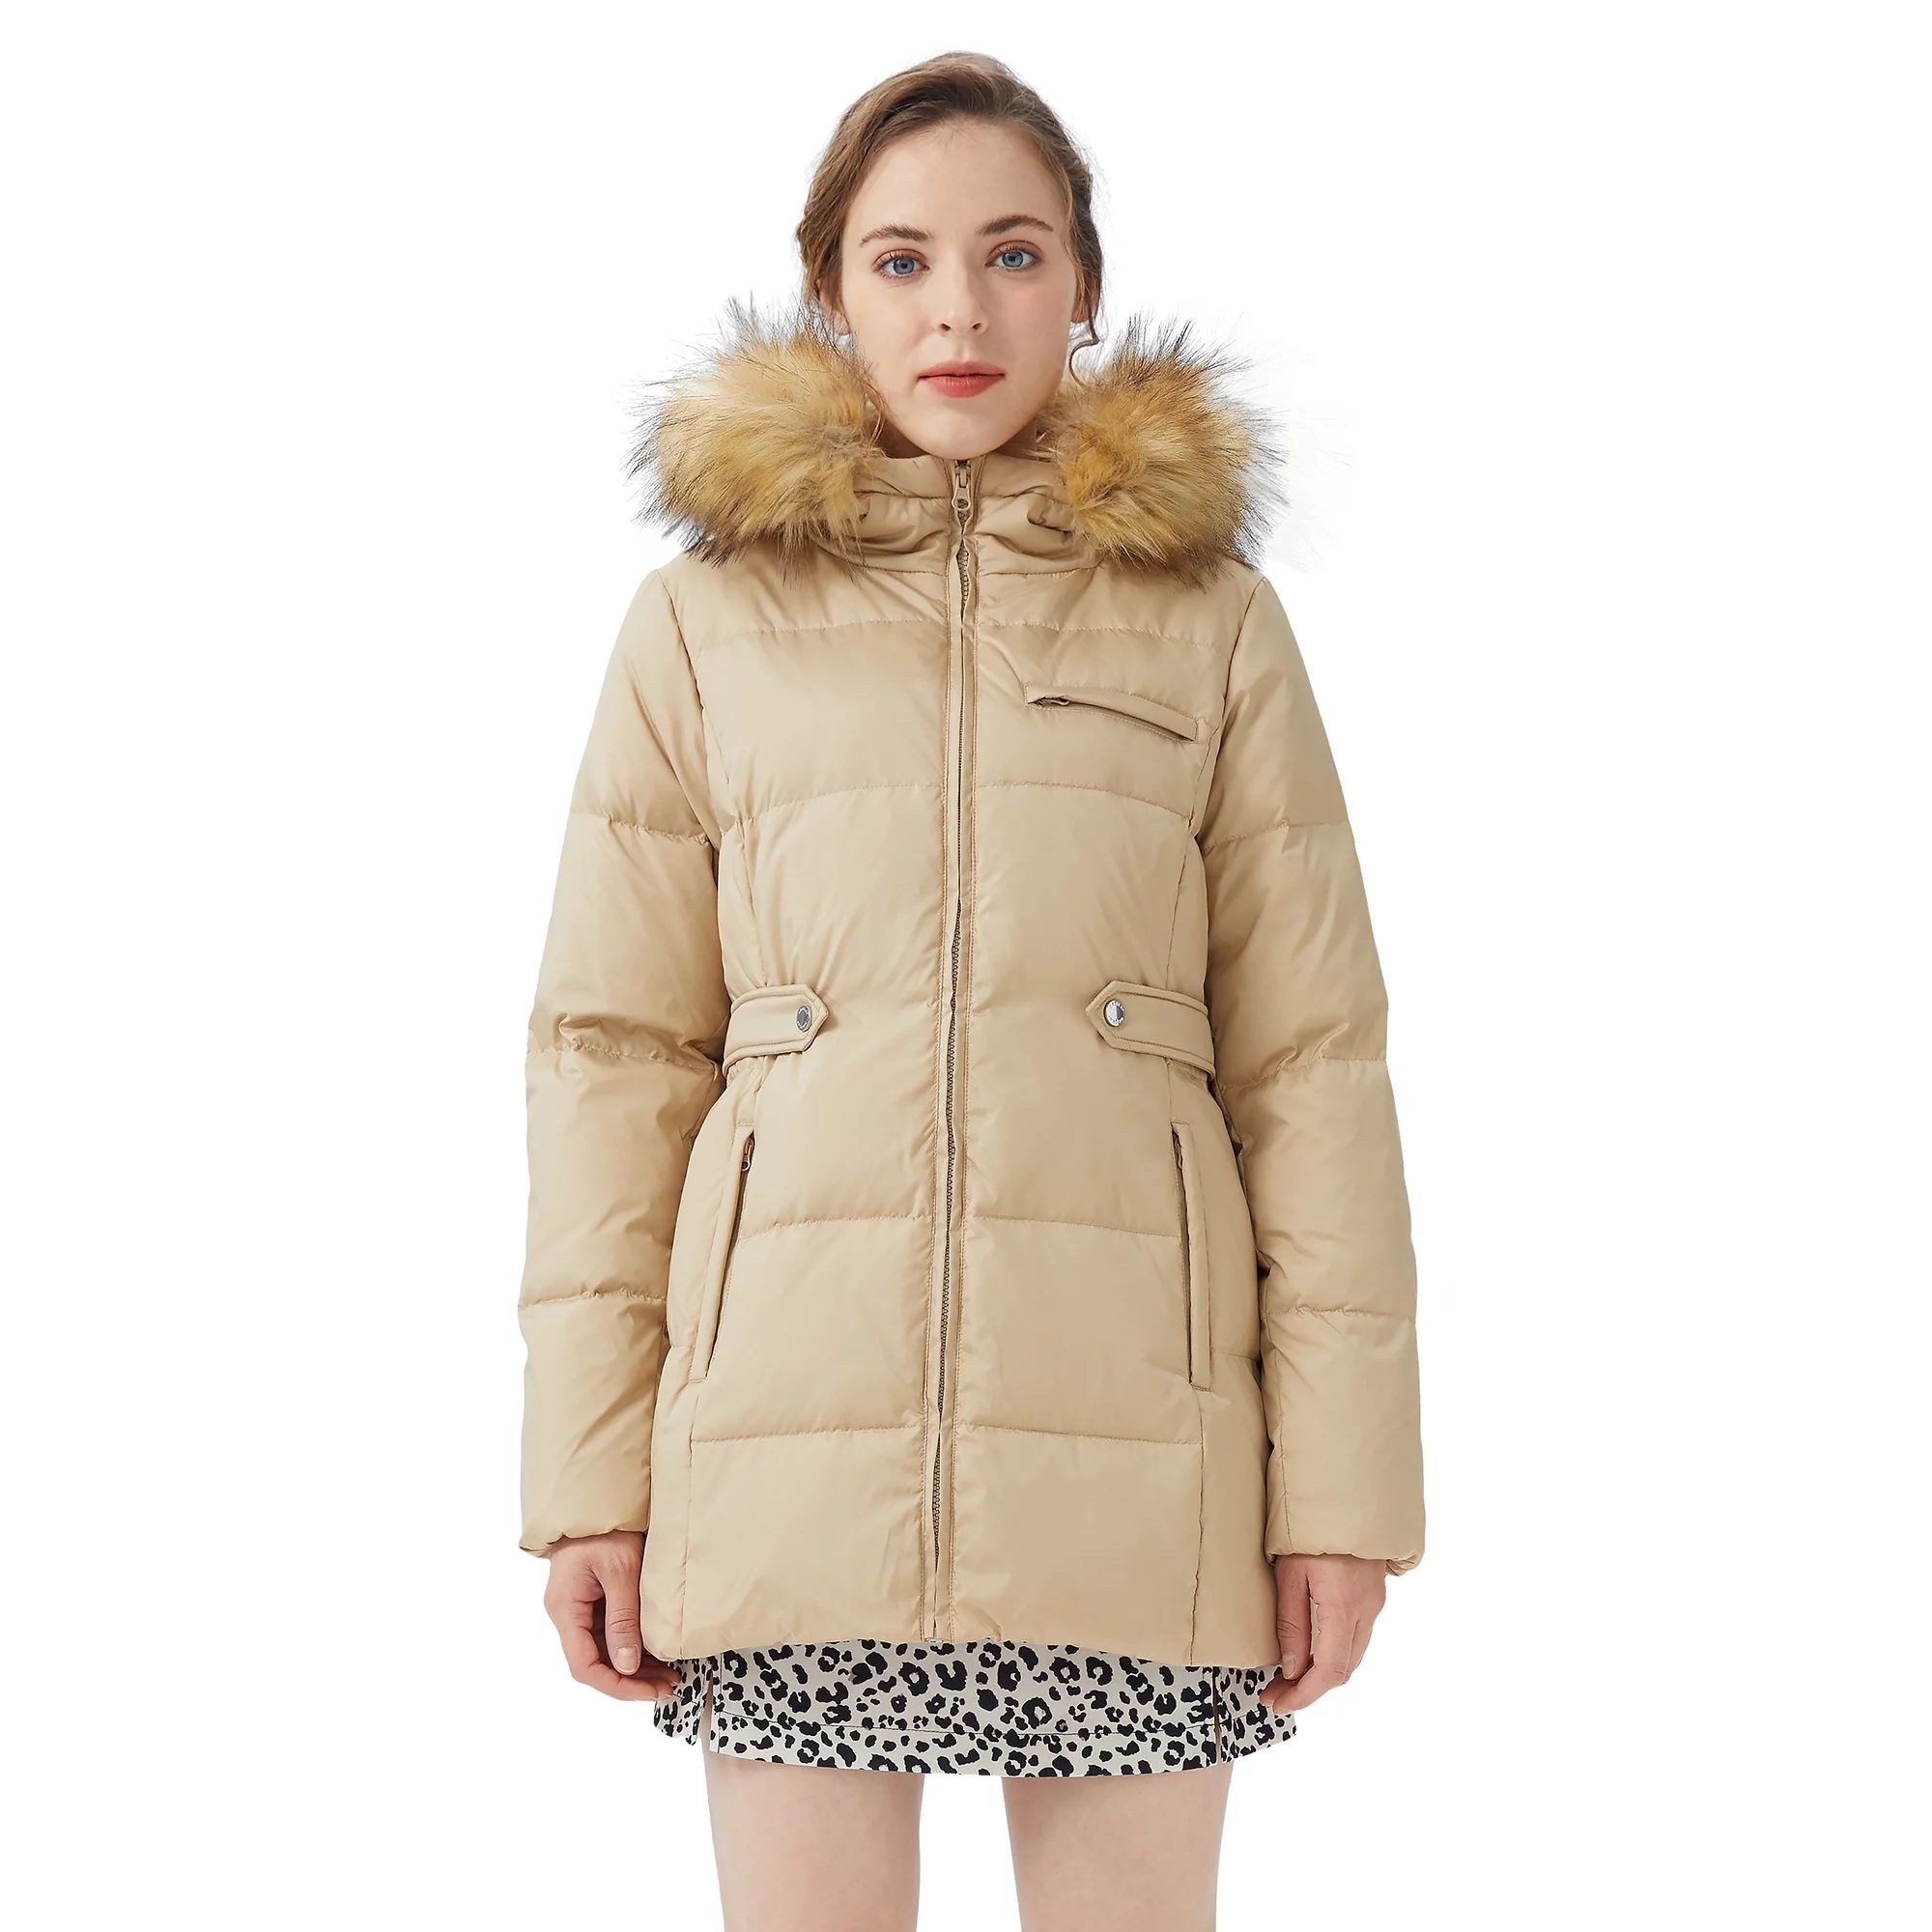 Orolay Women's Thickened Down Jacket Puffer Hooded Down Coat with Faux Fur | Walmart (US)